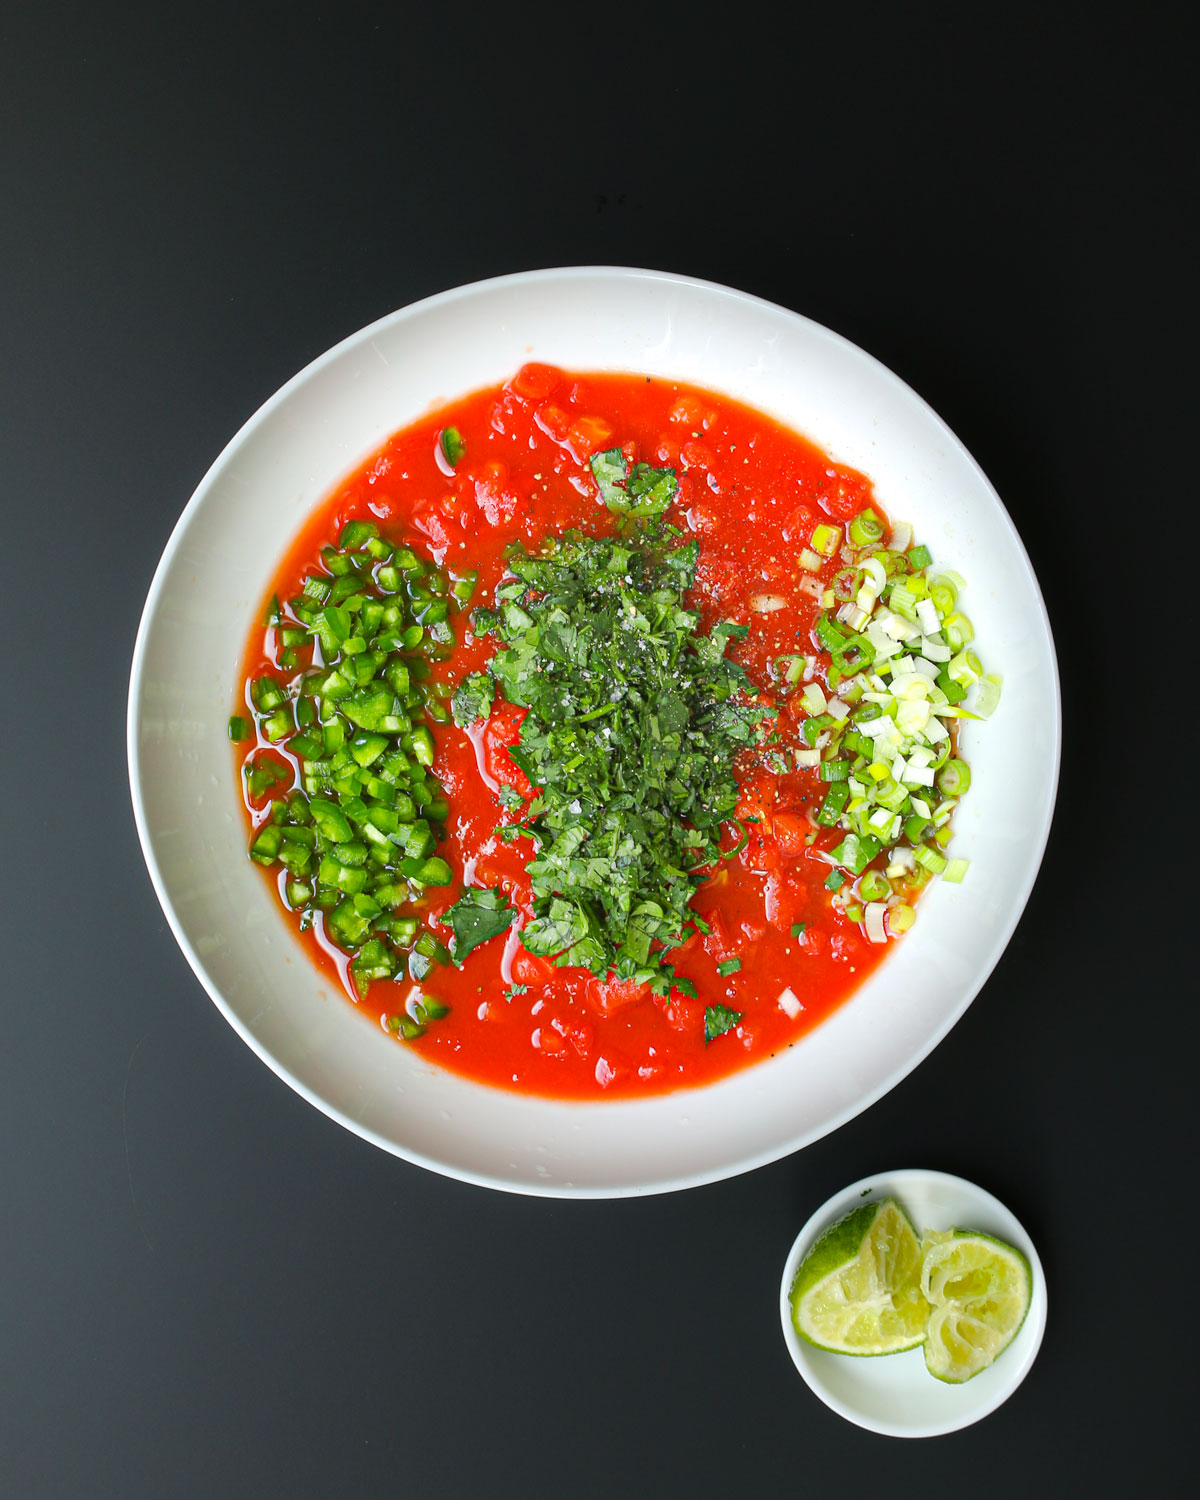 tomatoes in a large white bowl with the chopped onion, cilantro, and jalapeno in lines atop, the lime wedges are in a small white dish nearby on the black table.